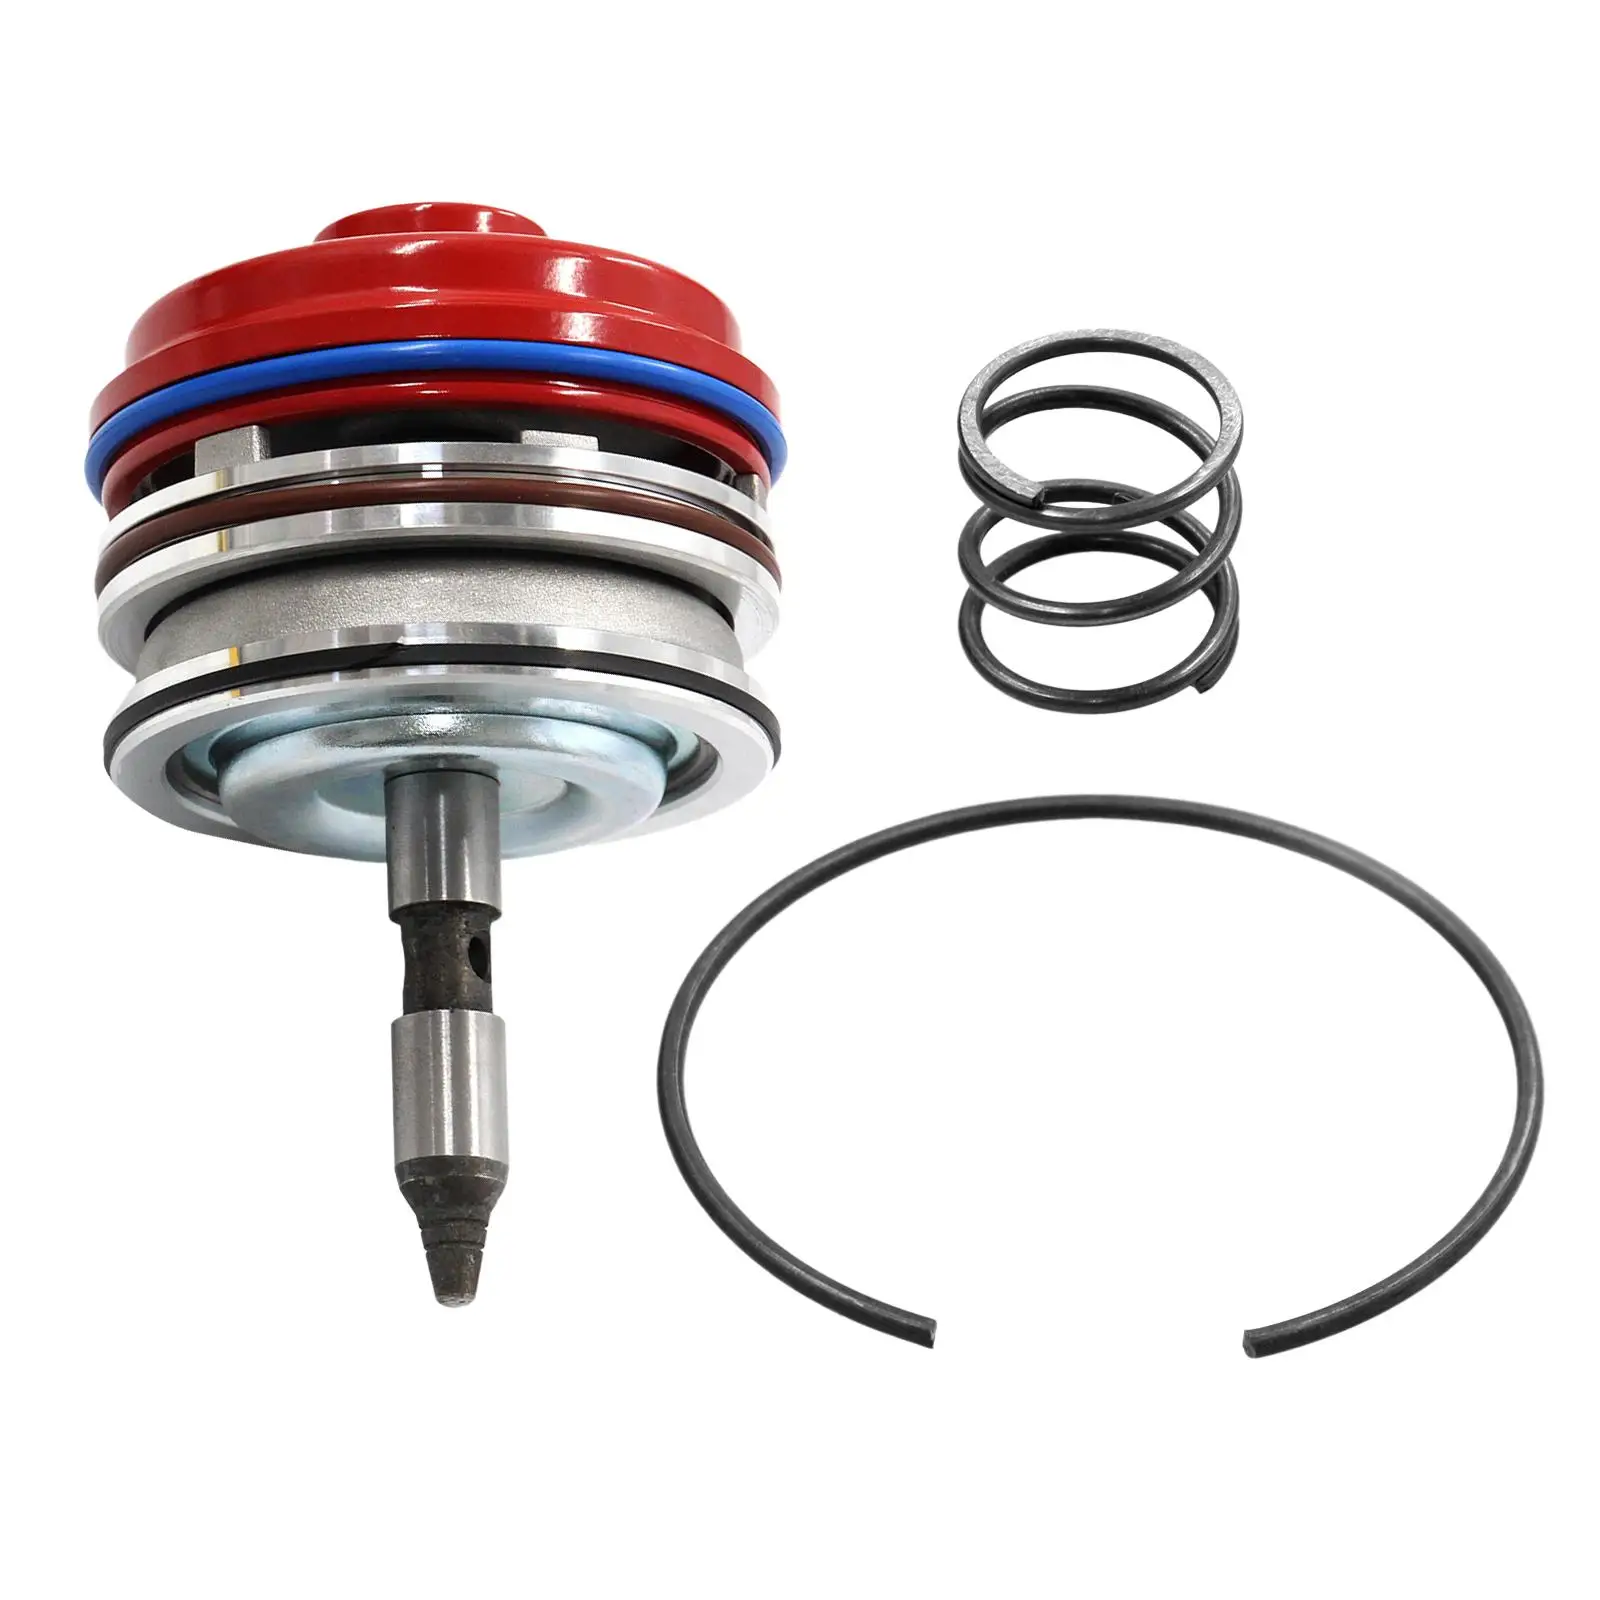 Servo Piston Assembly High Performance HD Transmissions Replacement with Cover